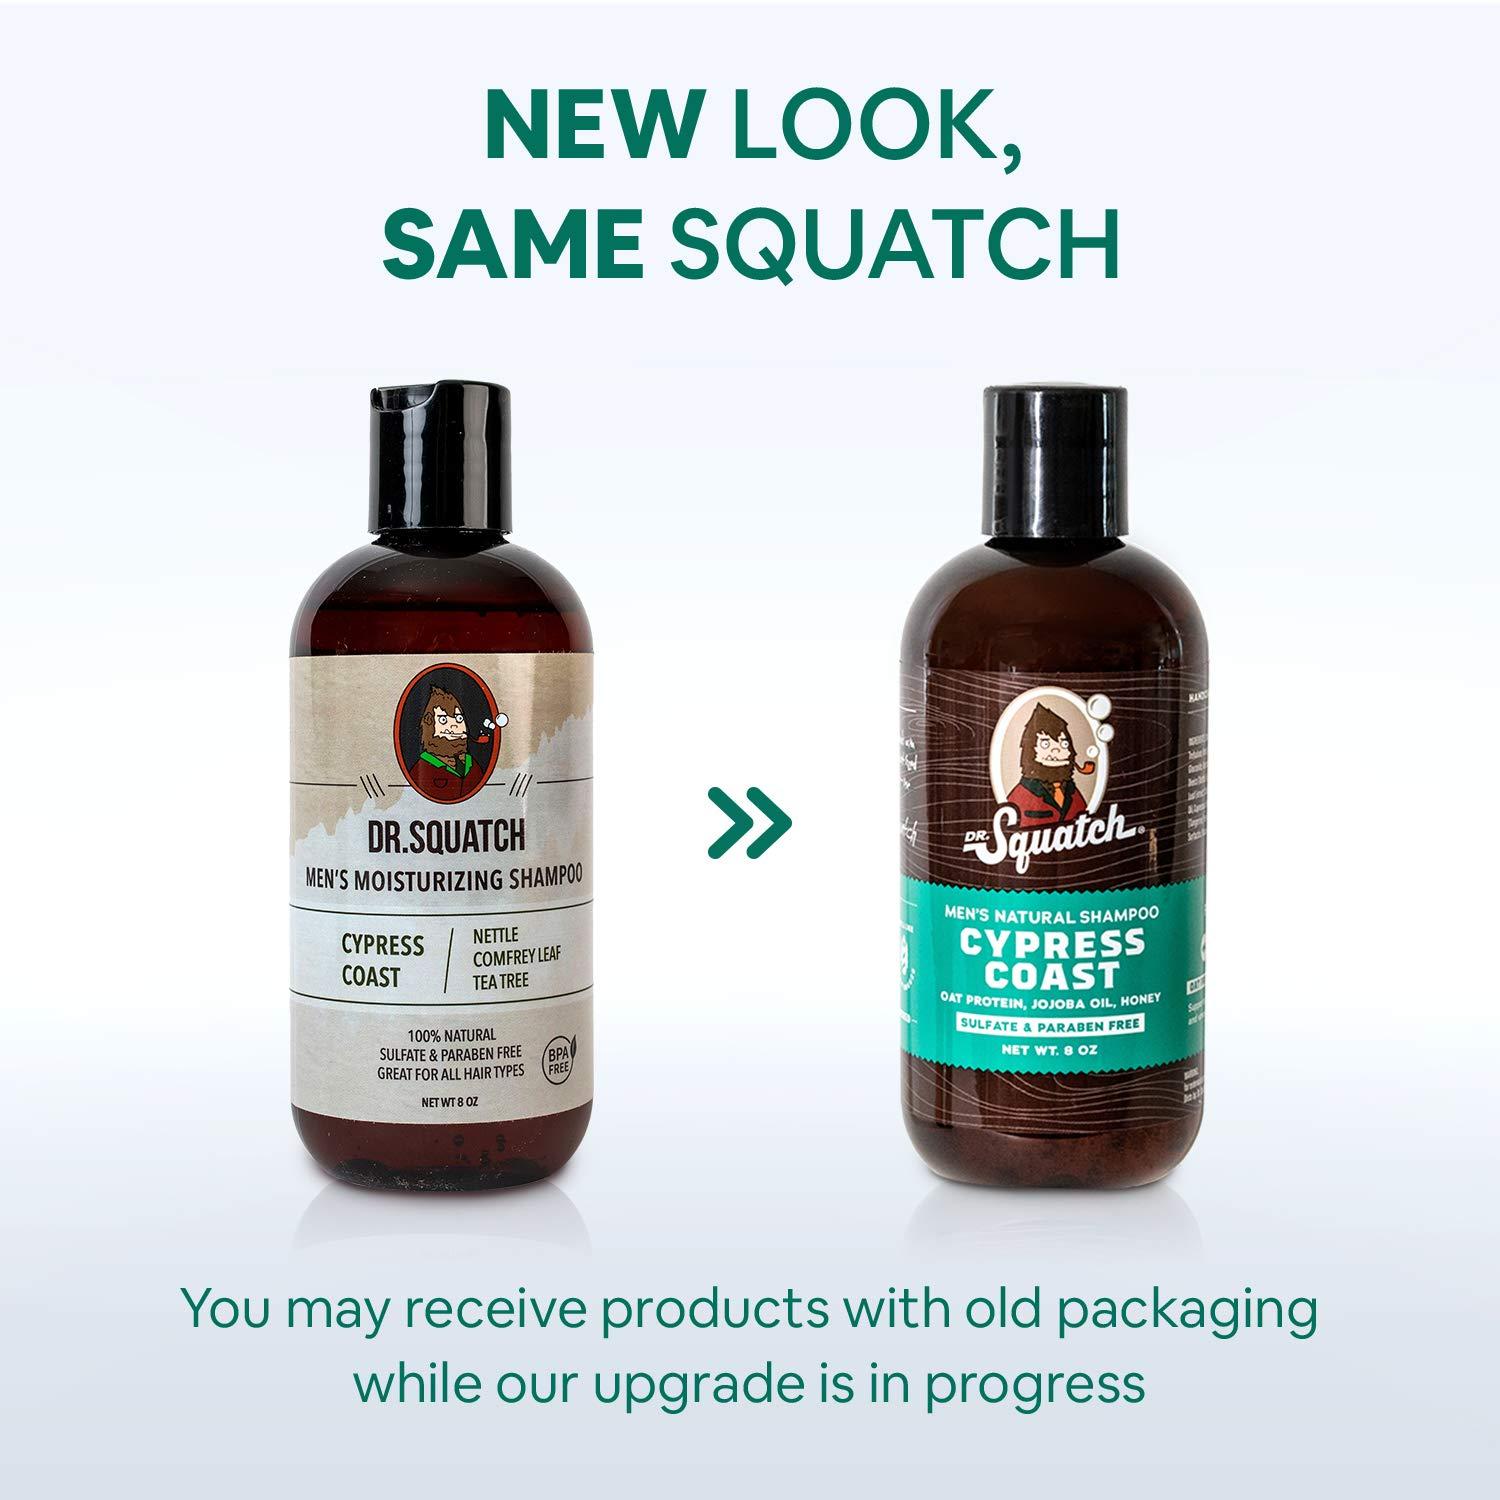 Dr. Squatch Cypress Coast Shampoo for Men - Keep Hair Looking Full Healthy  Hydrated - Naturally Sourced and Moisturizing Men's Shampoo